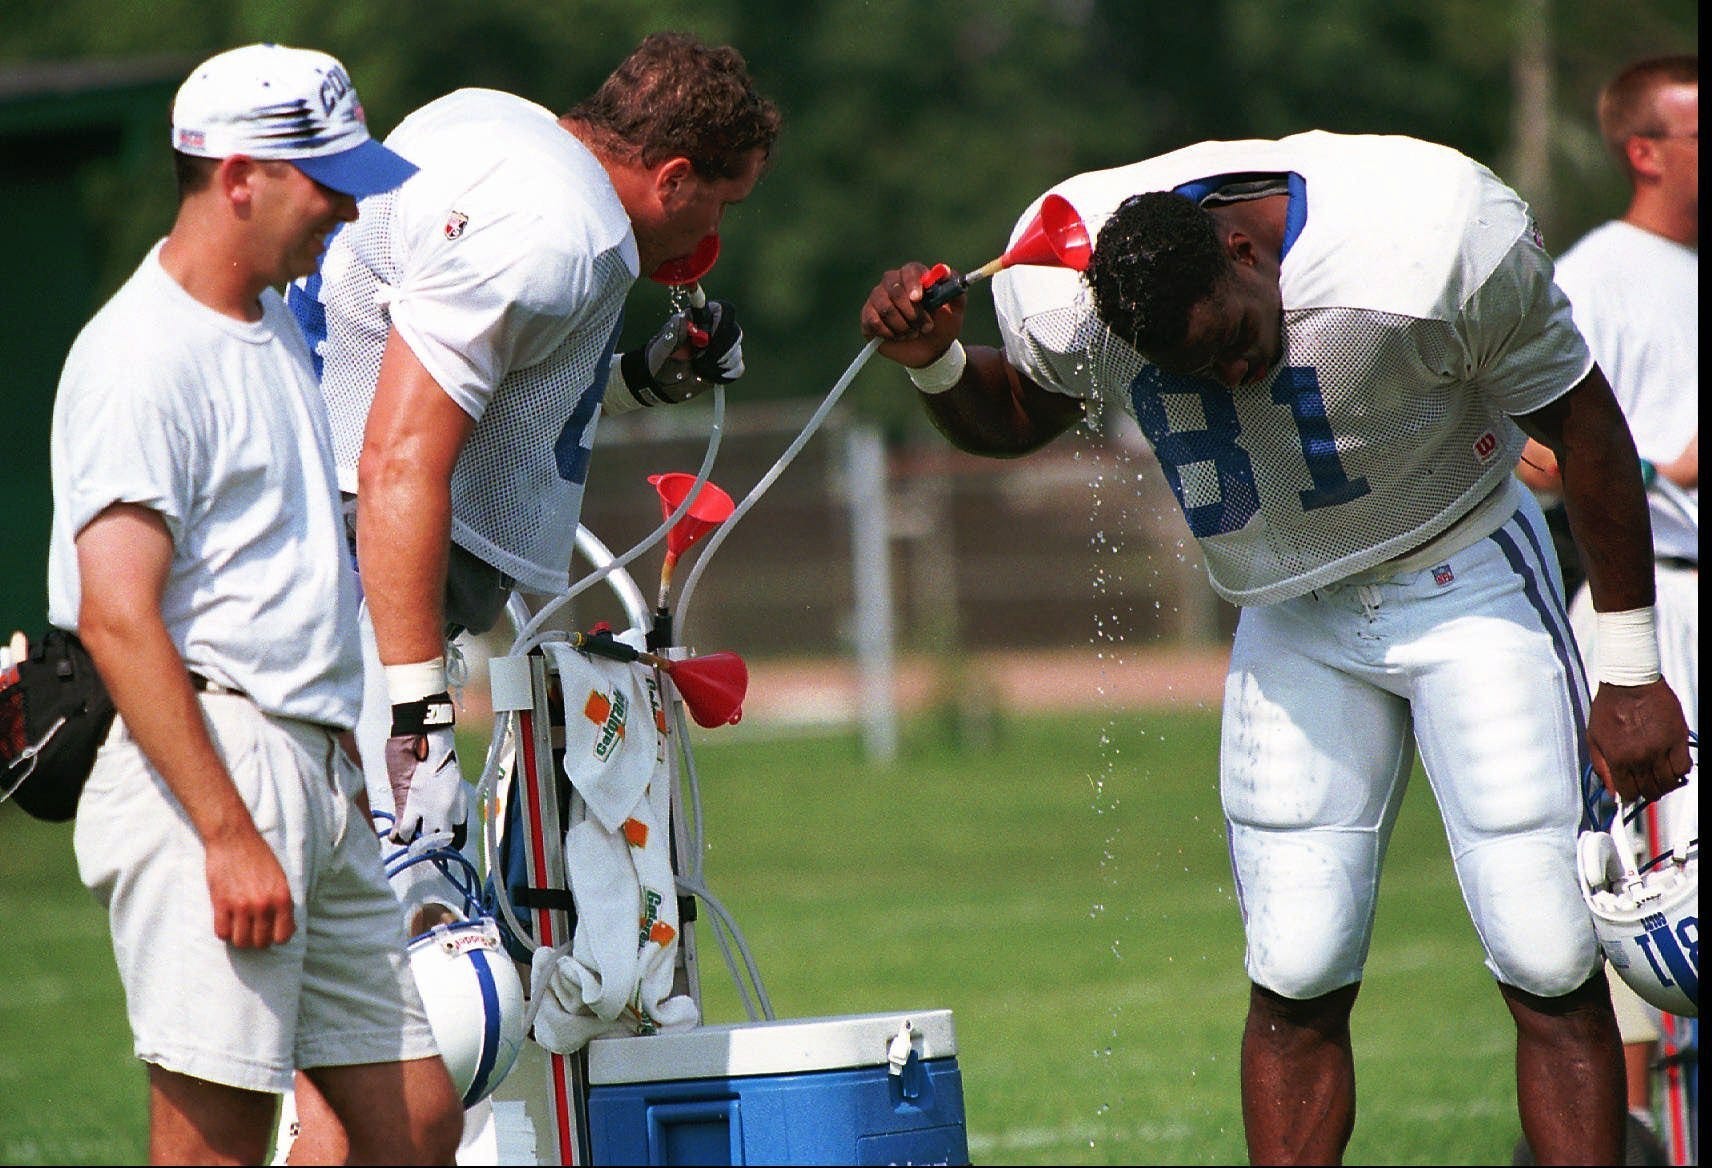 Indianapolis Colts tight end Scott Slutzker, left, takes a drink while fellow tight end Marcus Pollard takes a shower as they seek relief from the heat during drills Tuesday, Aug. 6, 1996, in Anderson, Ind. The Colts face another steamy two weeks at the training camp at Anderson University.